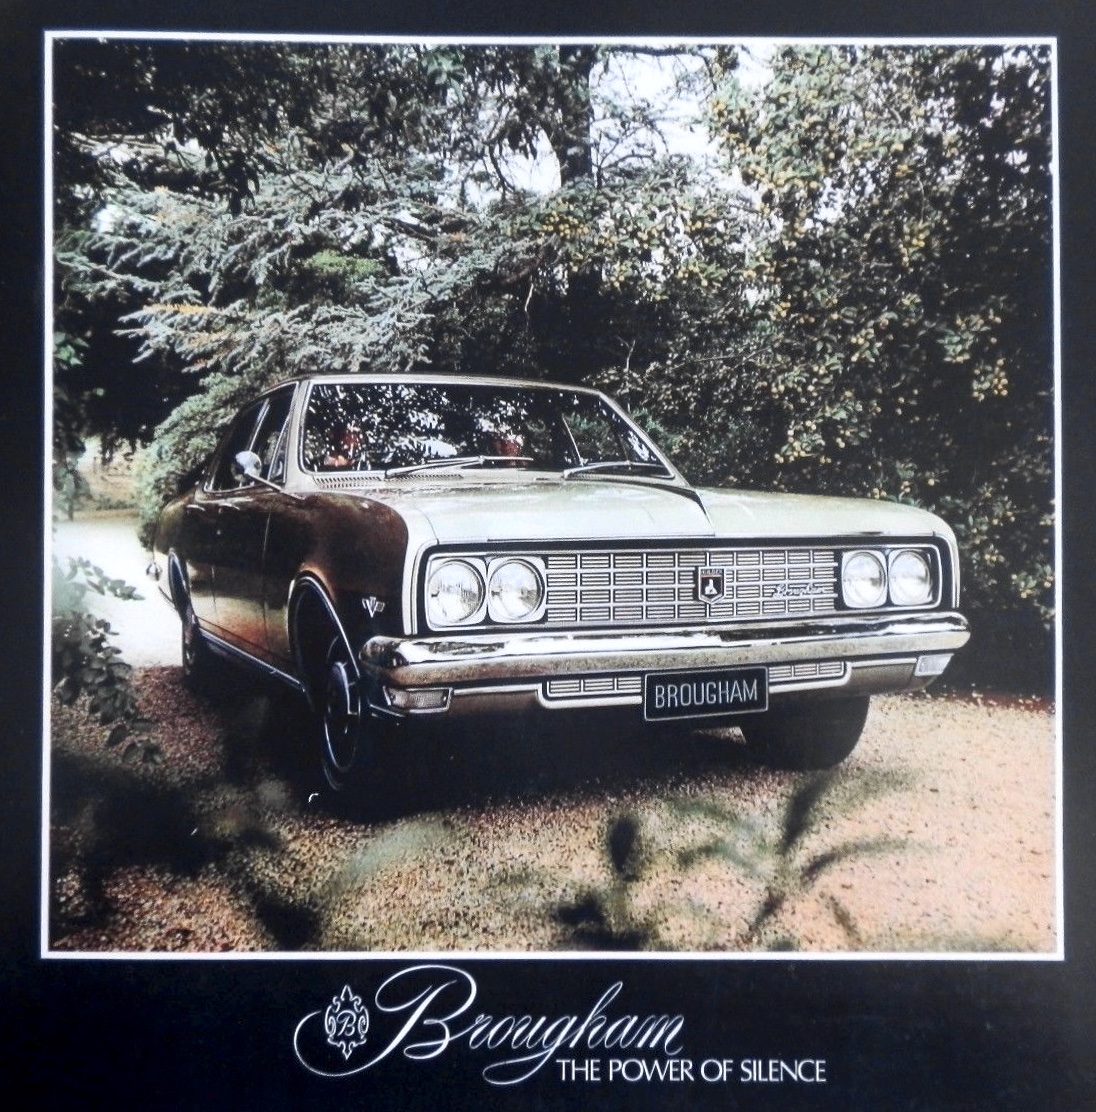 Holden HT Brougham - The Sound of Silence